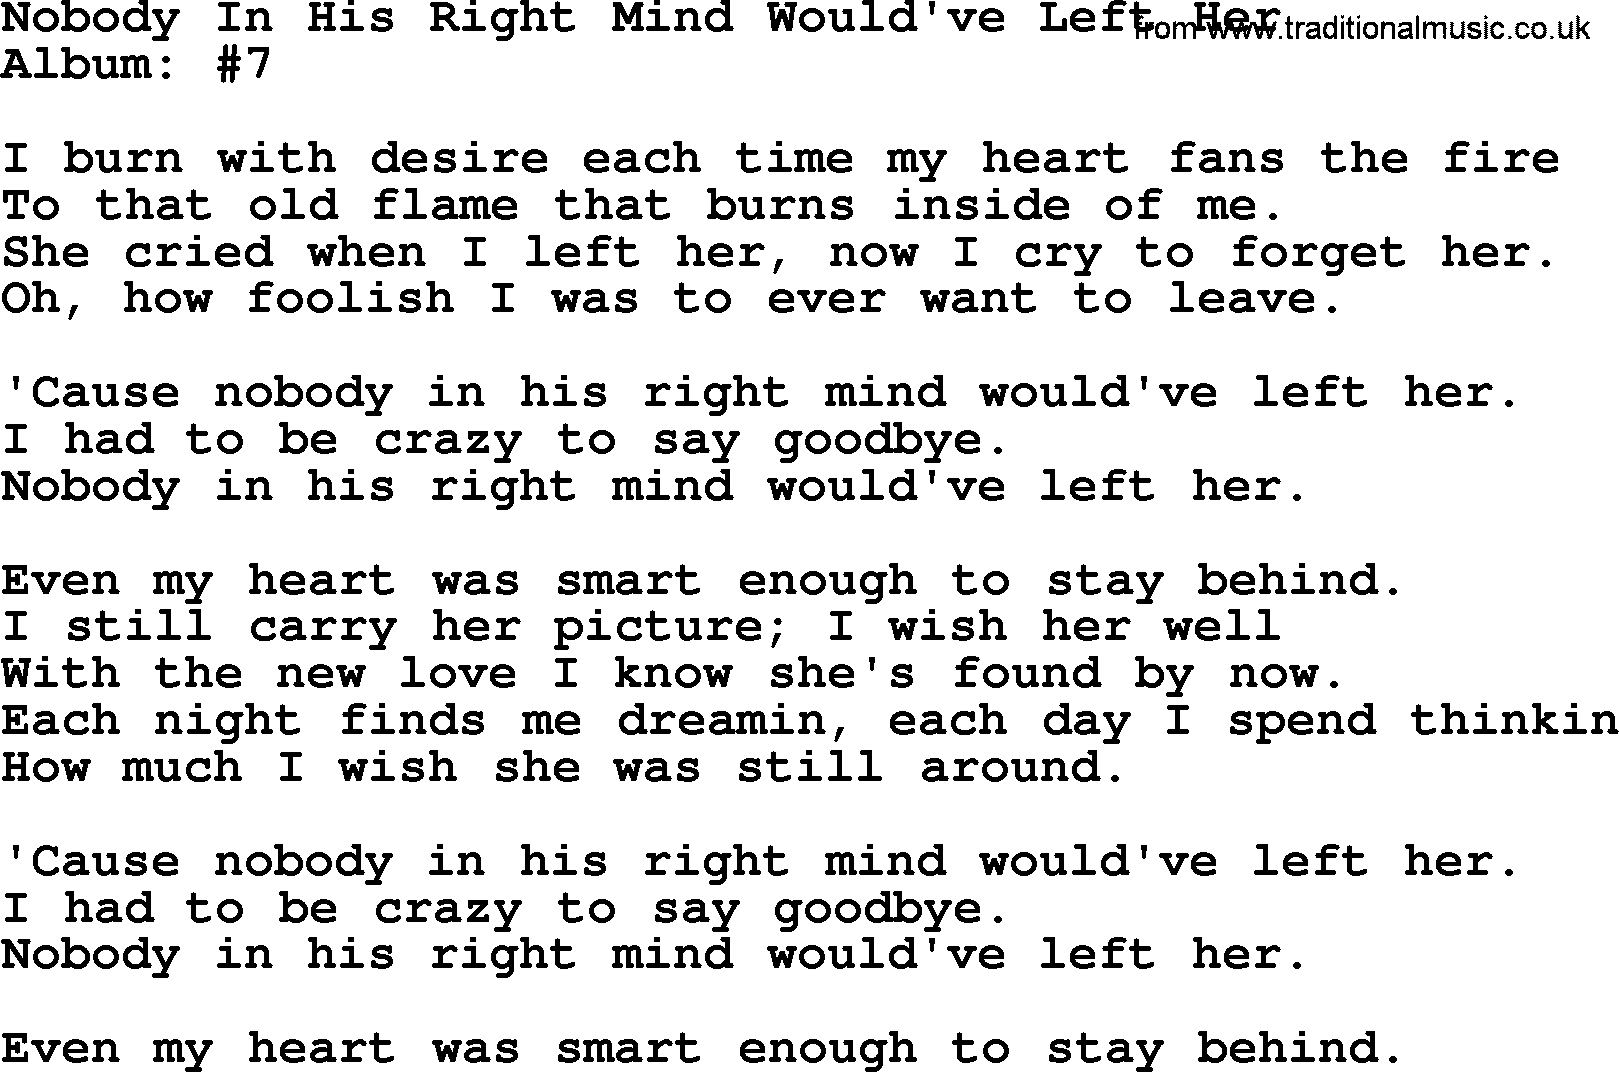 George Strait song: Nobody In His Right Mind Would've Left Her, lyrics